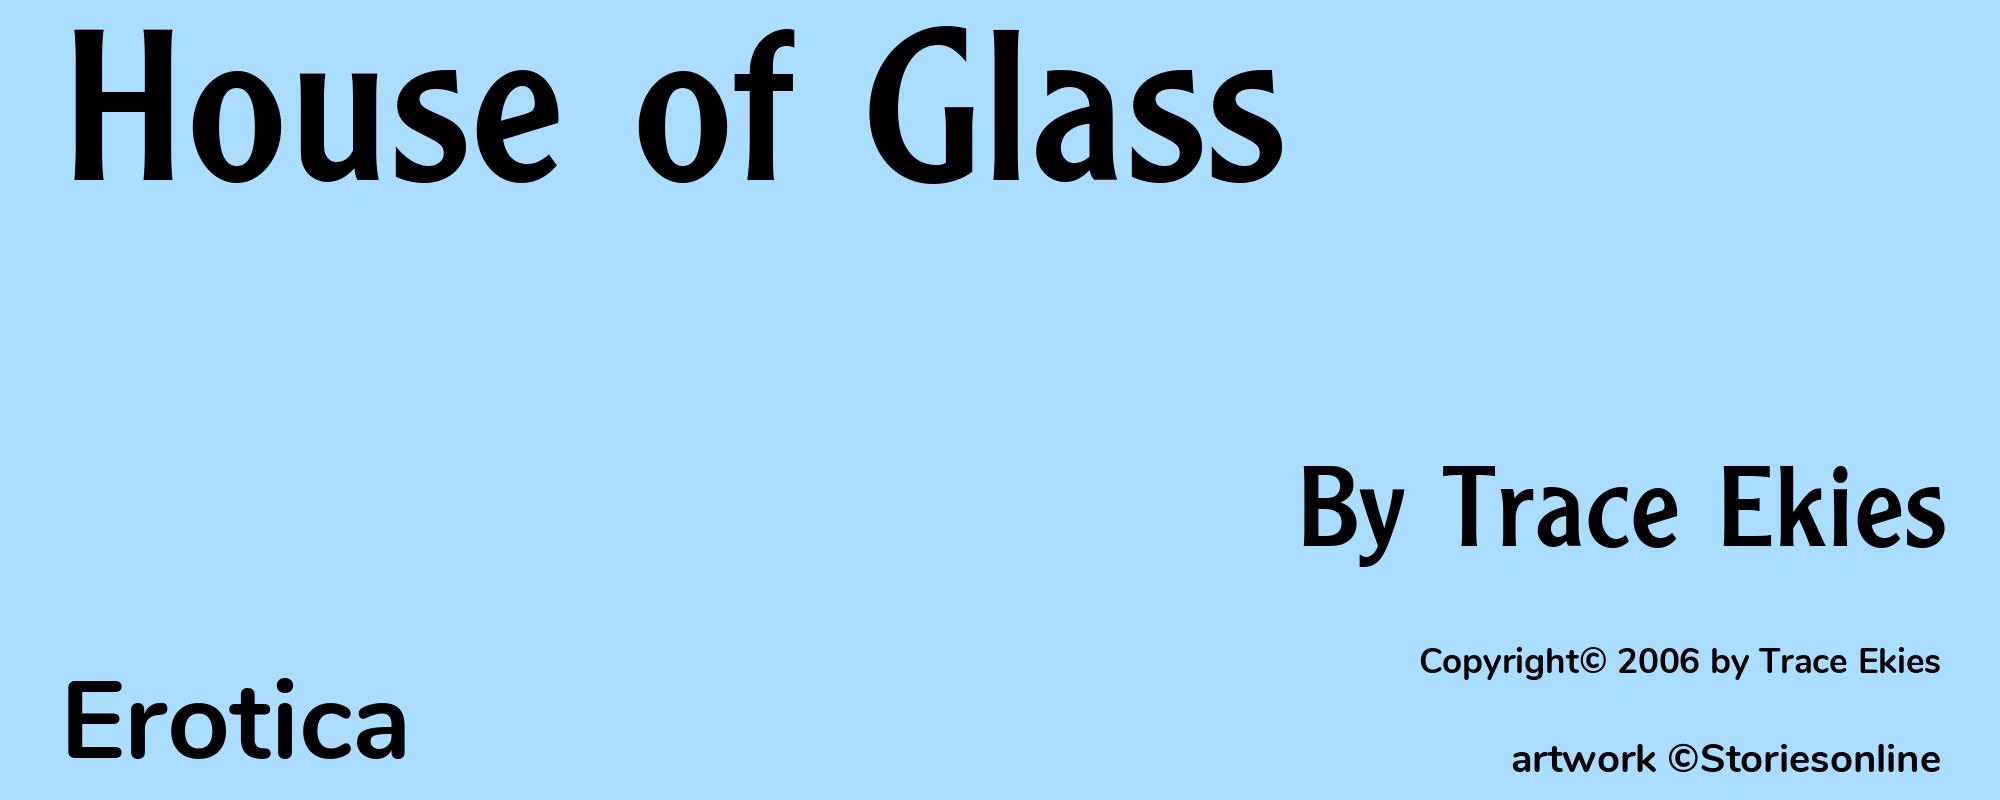 House of Glass - Cover